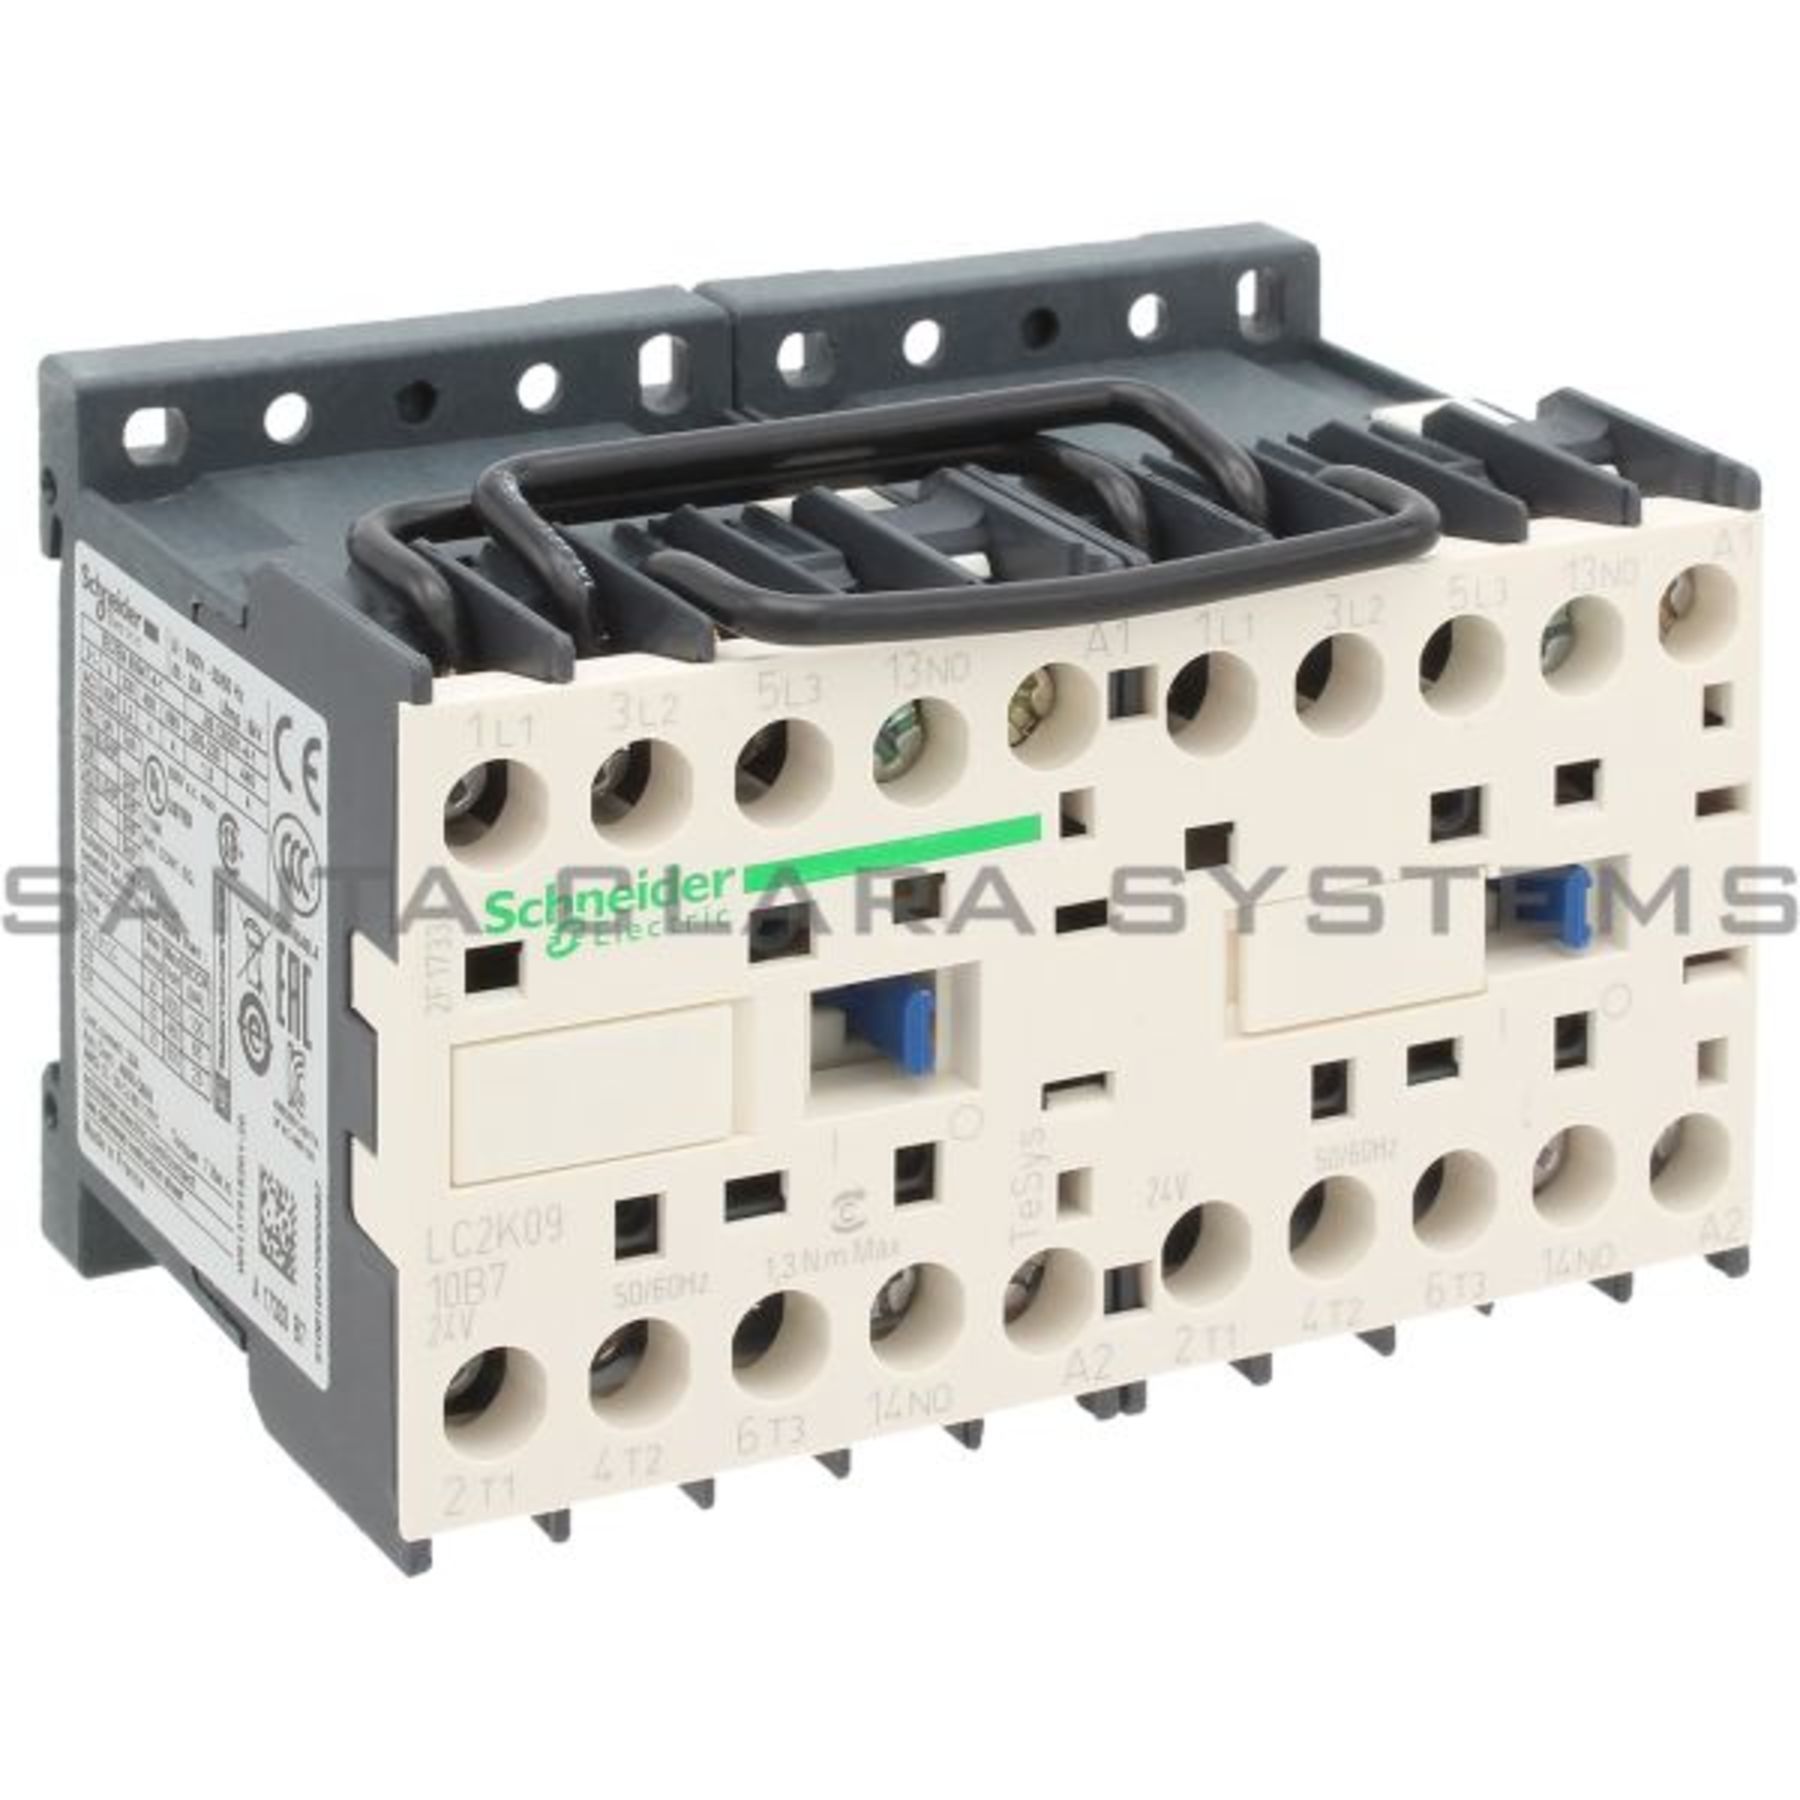 Schneider Electric TeSys K Lc2k 3 Pole Contactor 3no 9 a 4 KW 24 V AC Coil for sale online 